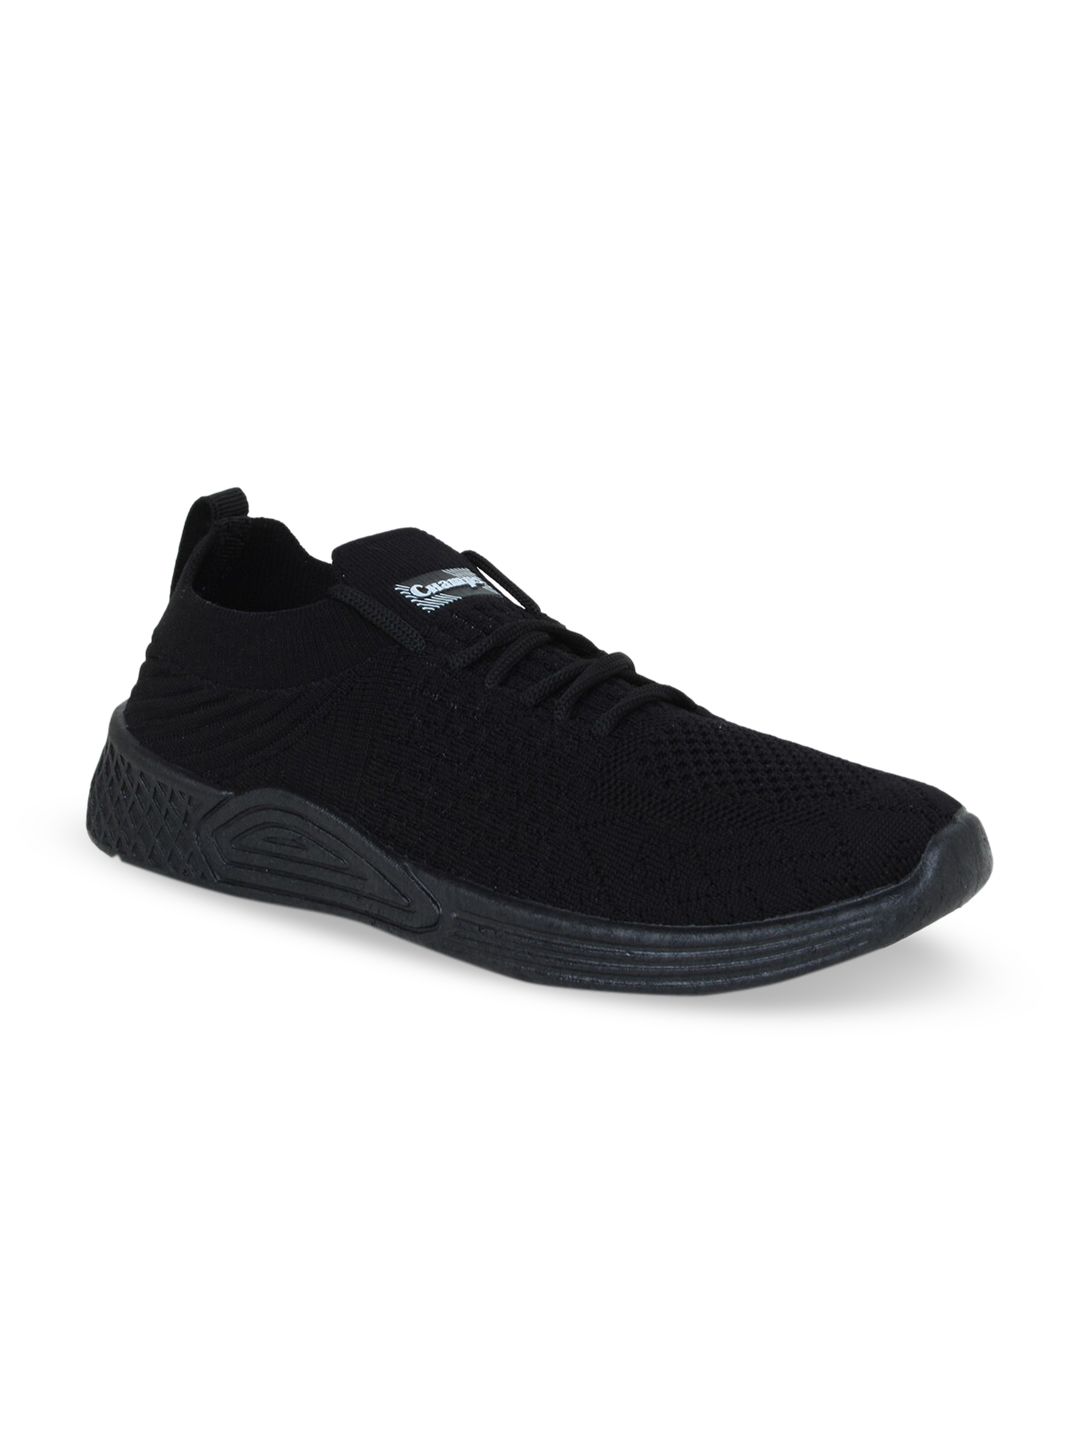 Champs Women Black Woven Design Sneakers Price in India